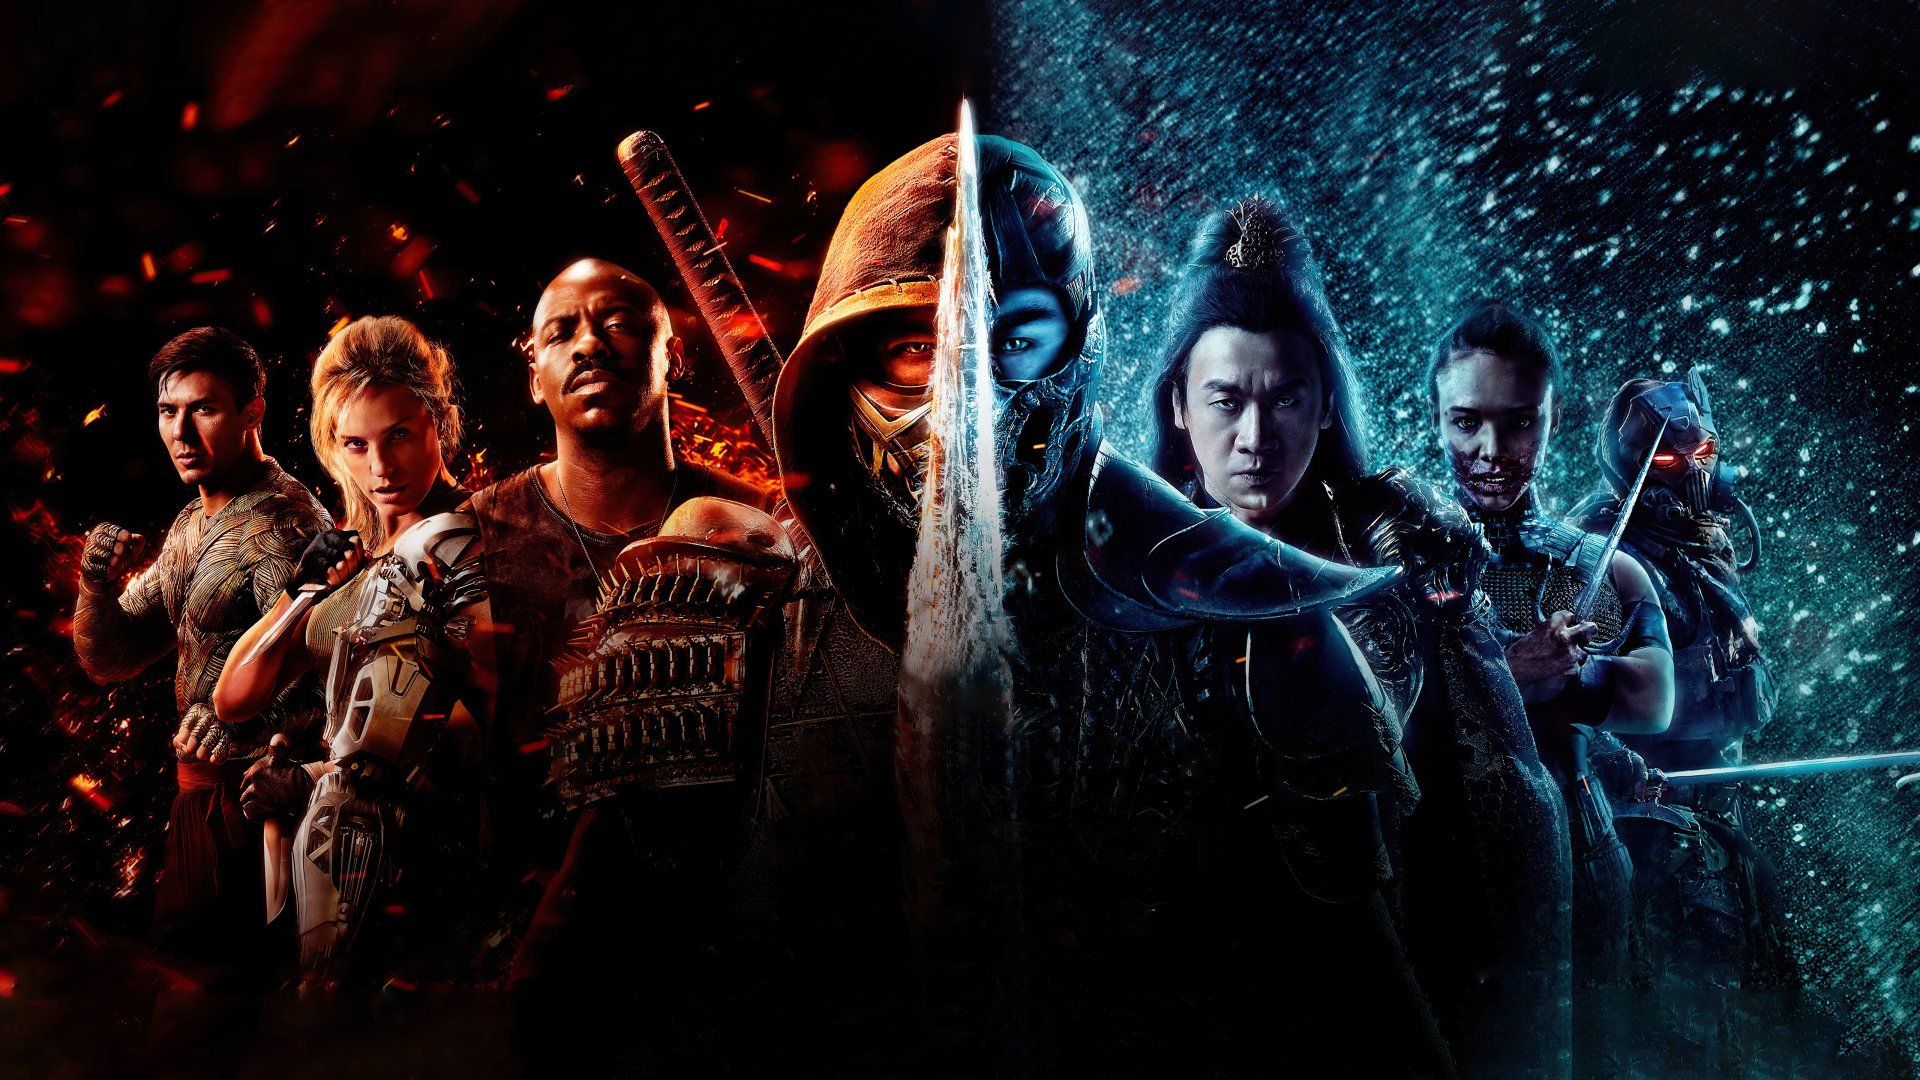 A side-by-side of the characters in the Mortal Kombat Movie